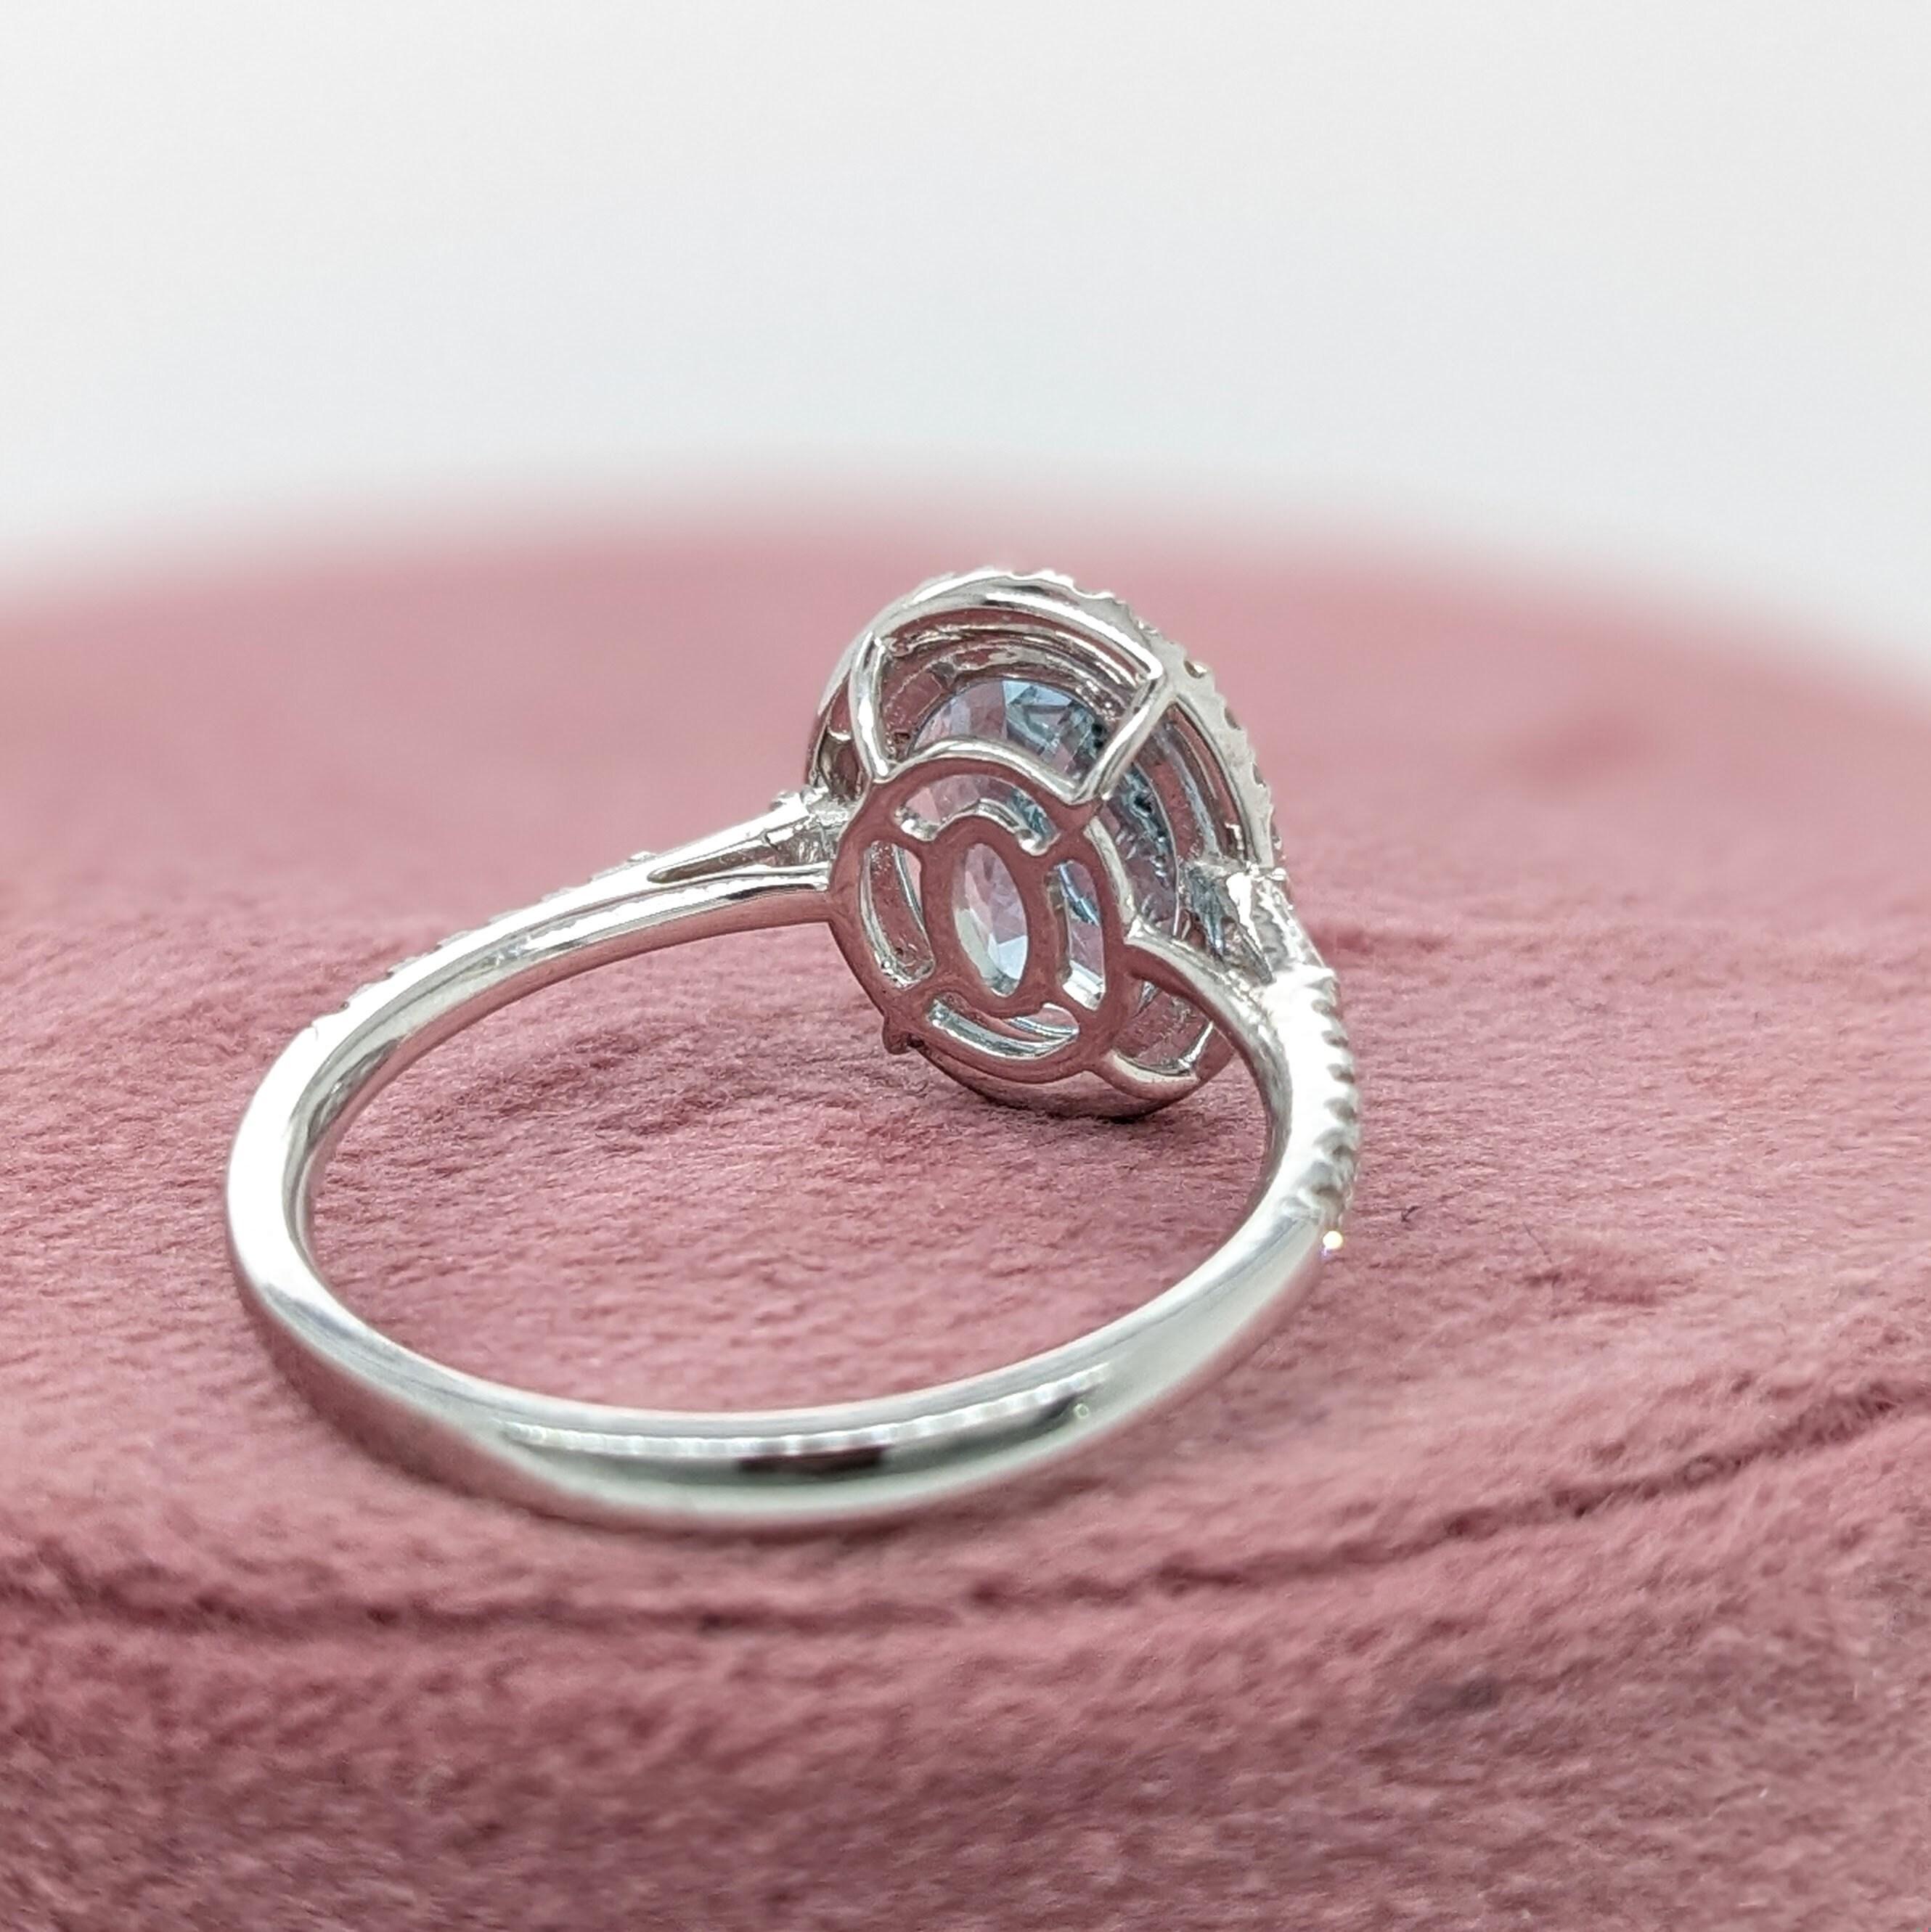 Women's Beautiful Aquamarine Ring in Solid 14K White Gold with a Halo of Natural Diamond